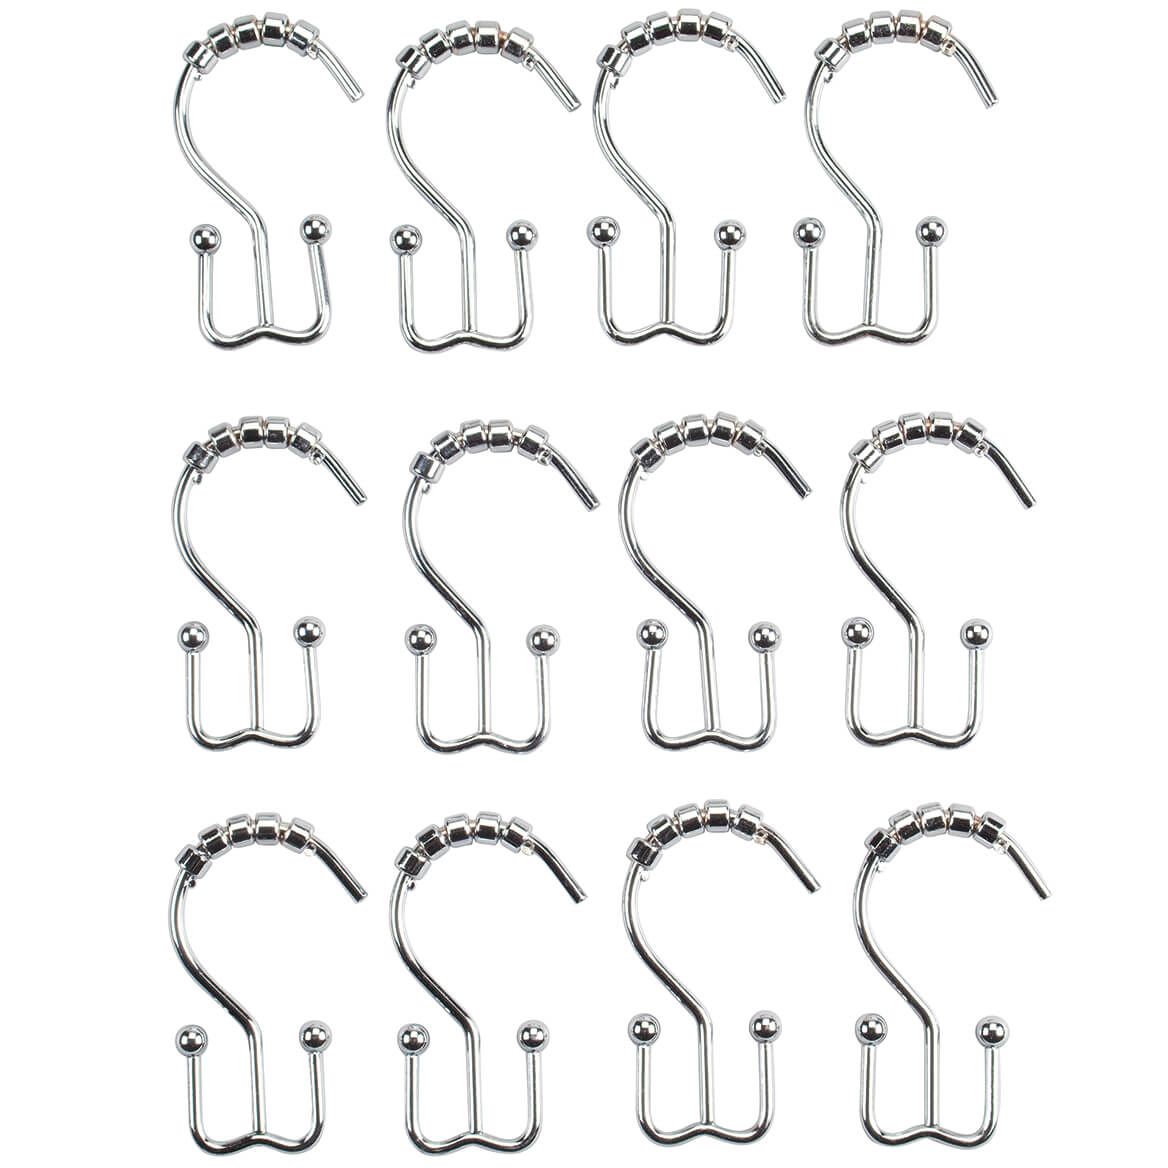 Stainless Steel Double Shower Curtain Hooks,Set of 12 + '-' + 370942